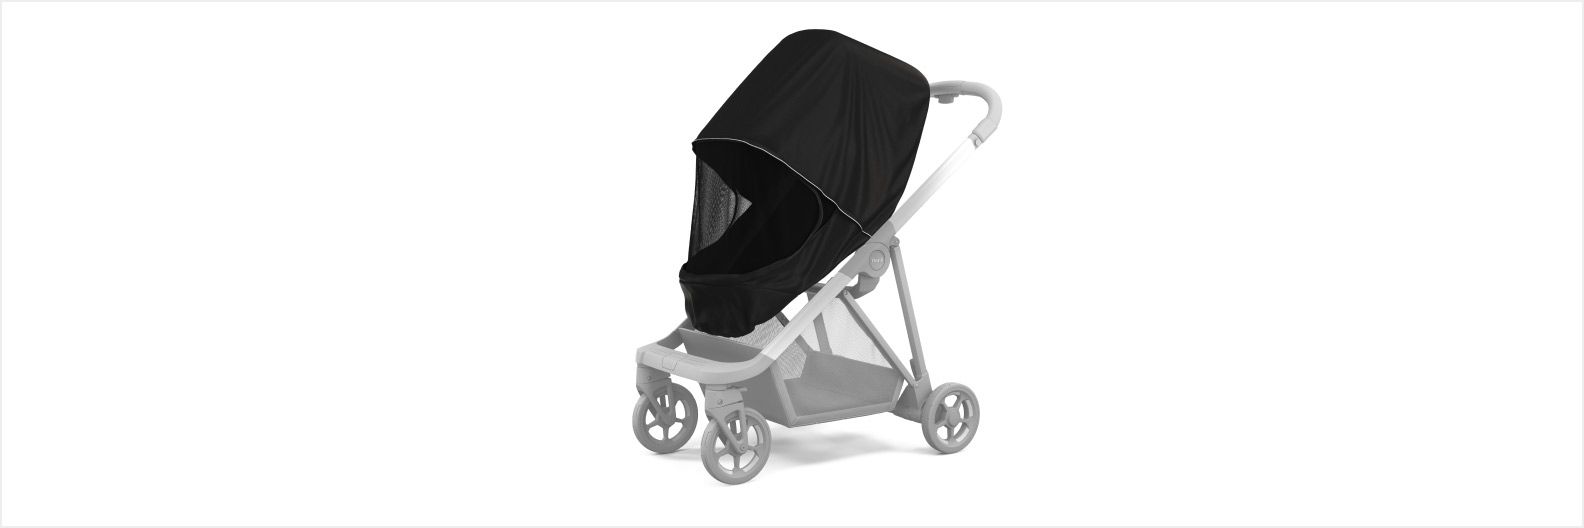 A 3D rendition of the Thule Shine stroller and the Thule Shine All-weather cover with a white background.